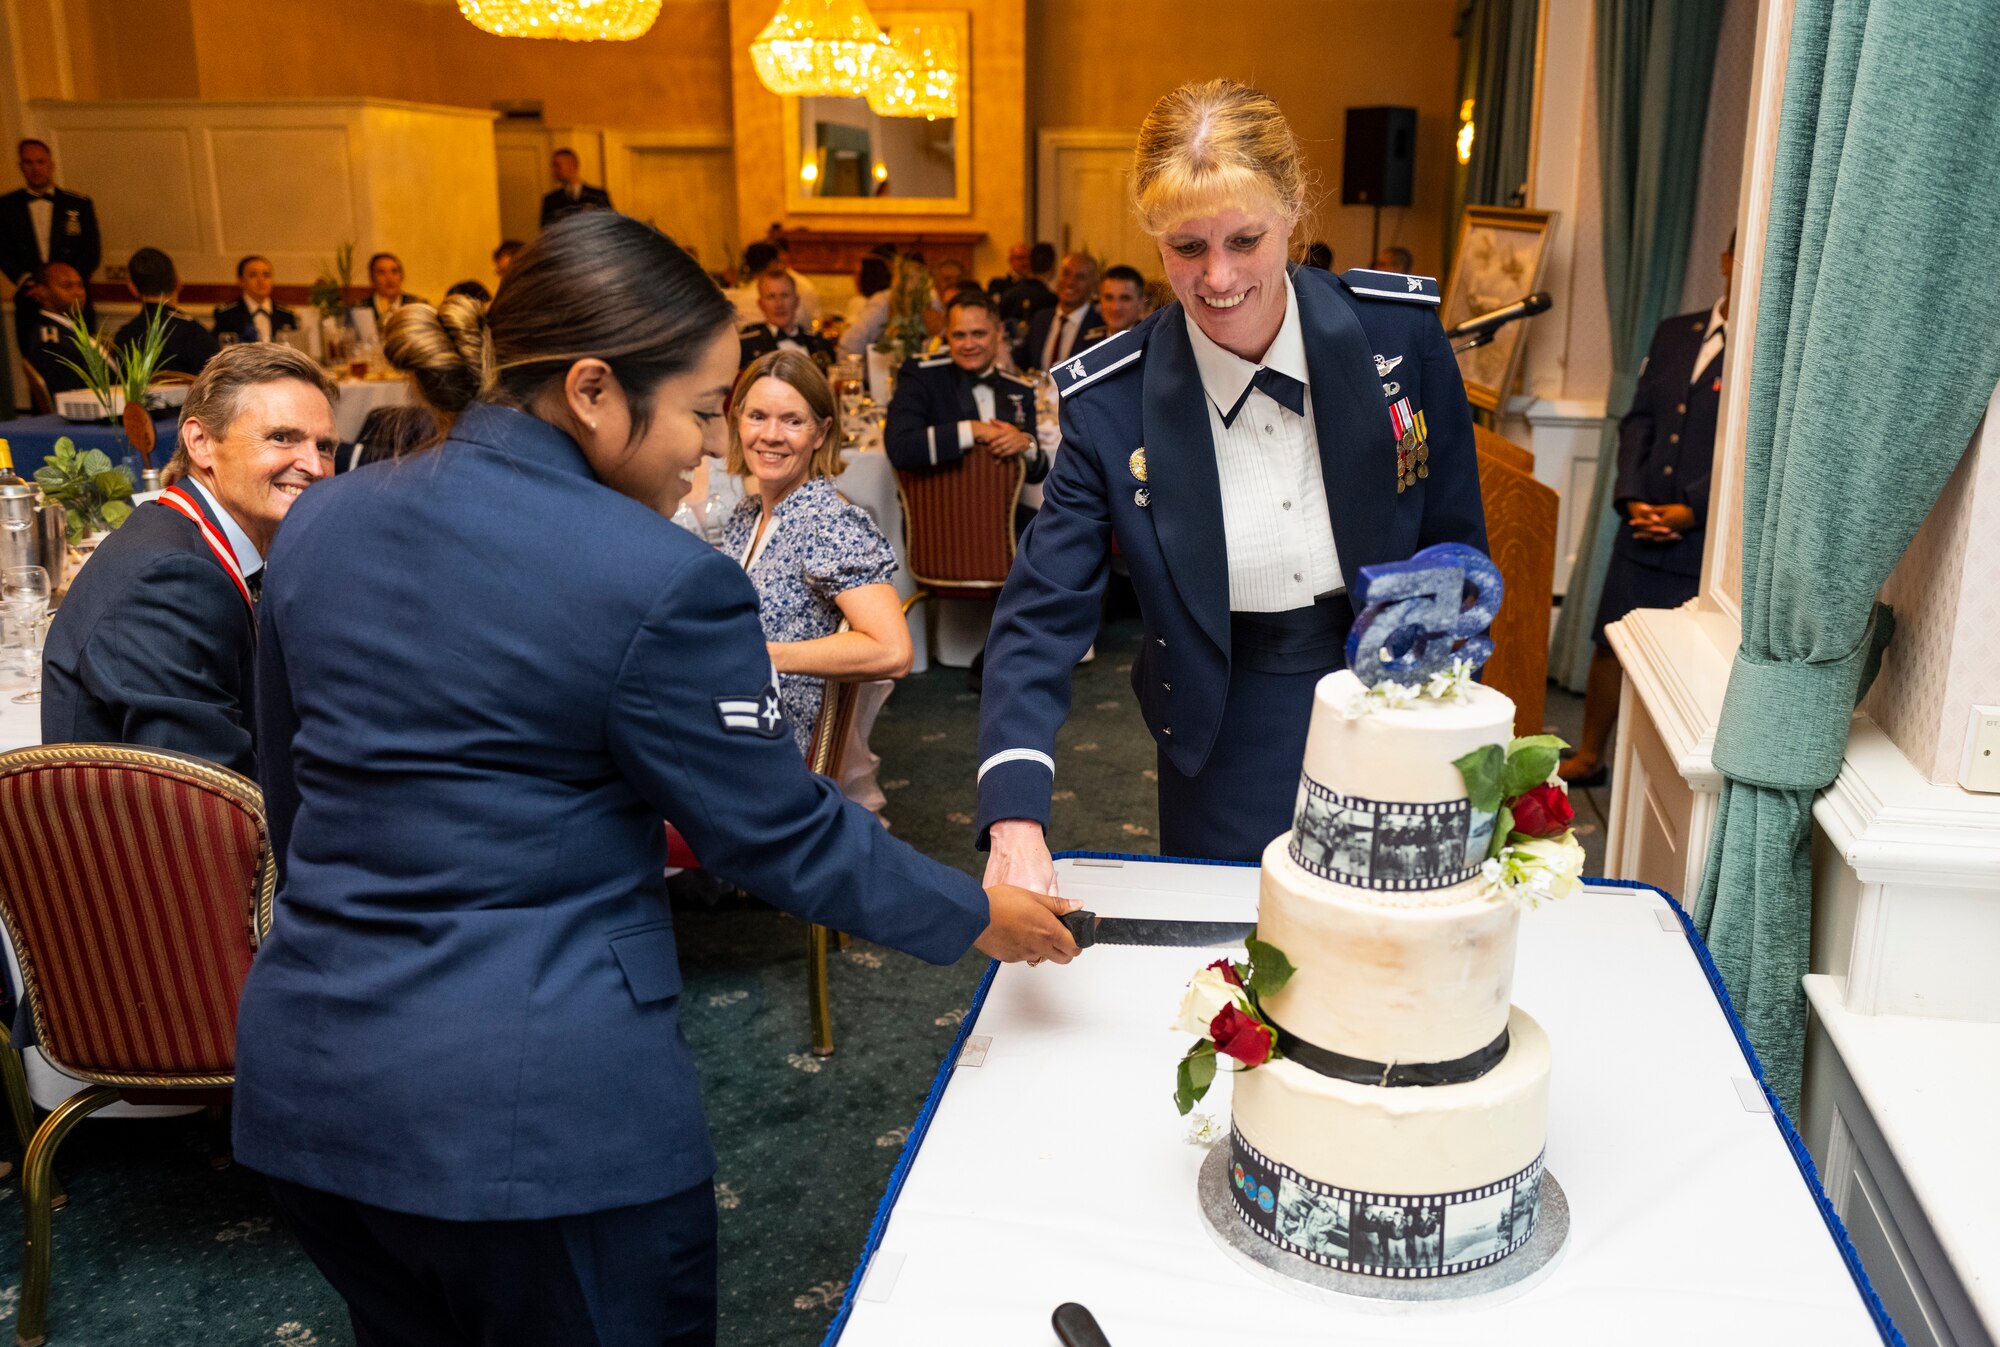 U.S. Air Force Col. Kristin Thompson, 55th Wing commander, right, and Airman 1st Class Noelia Alvarez-Mendoza, 95th Reconnaissance Squadron aviation resource manager, cut the cake during the 95th RS’s 105th anniversary celebration at Royal Air Force Mildenhall, England, Aug. 19, 2022. The 95th RS is a component unit of the 55th Operations Group at Offut Air Force Base, Nebraska, though they are currently assigned to RAF Mildenhall to conduct information gathering flight operations throughout the European and Mediterranean theaters.